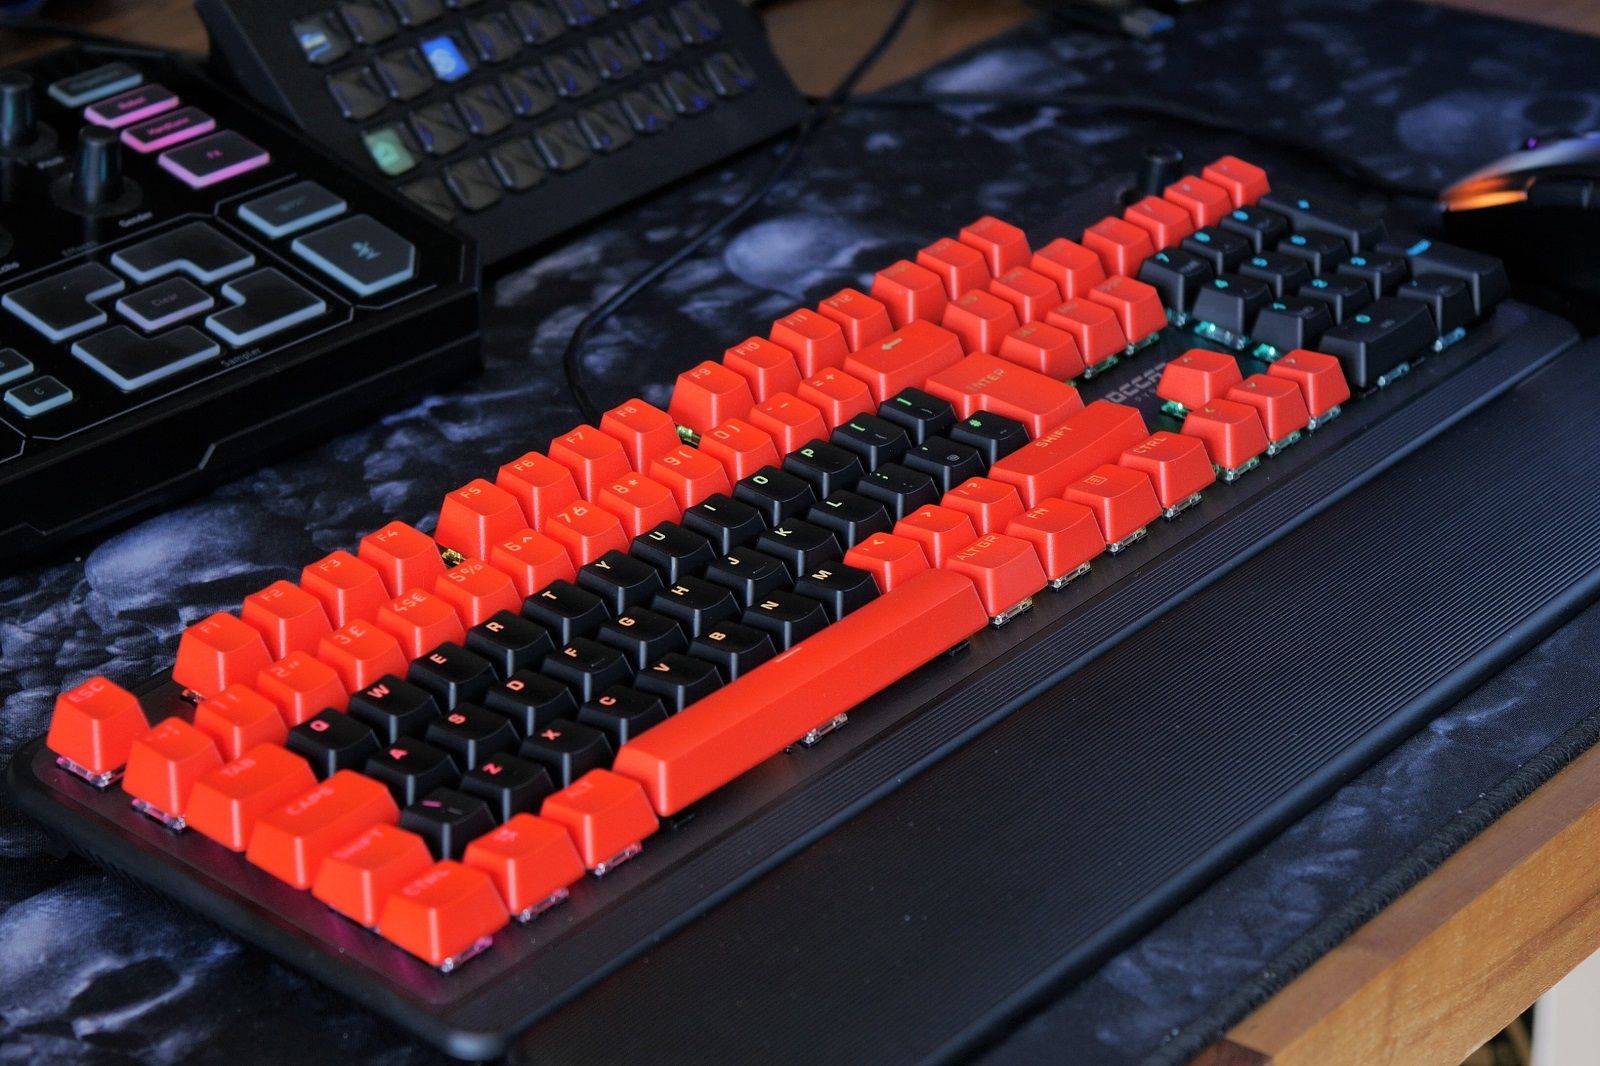 Roccat Pyro gaming keyboard review: An affordable mechanical keyboard with appeal photo 13